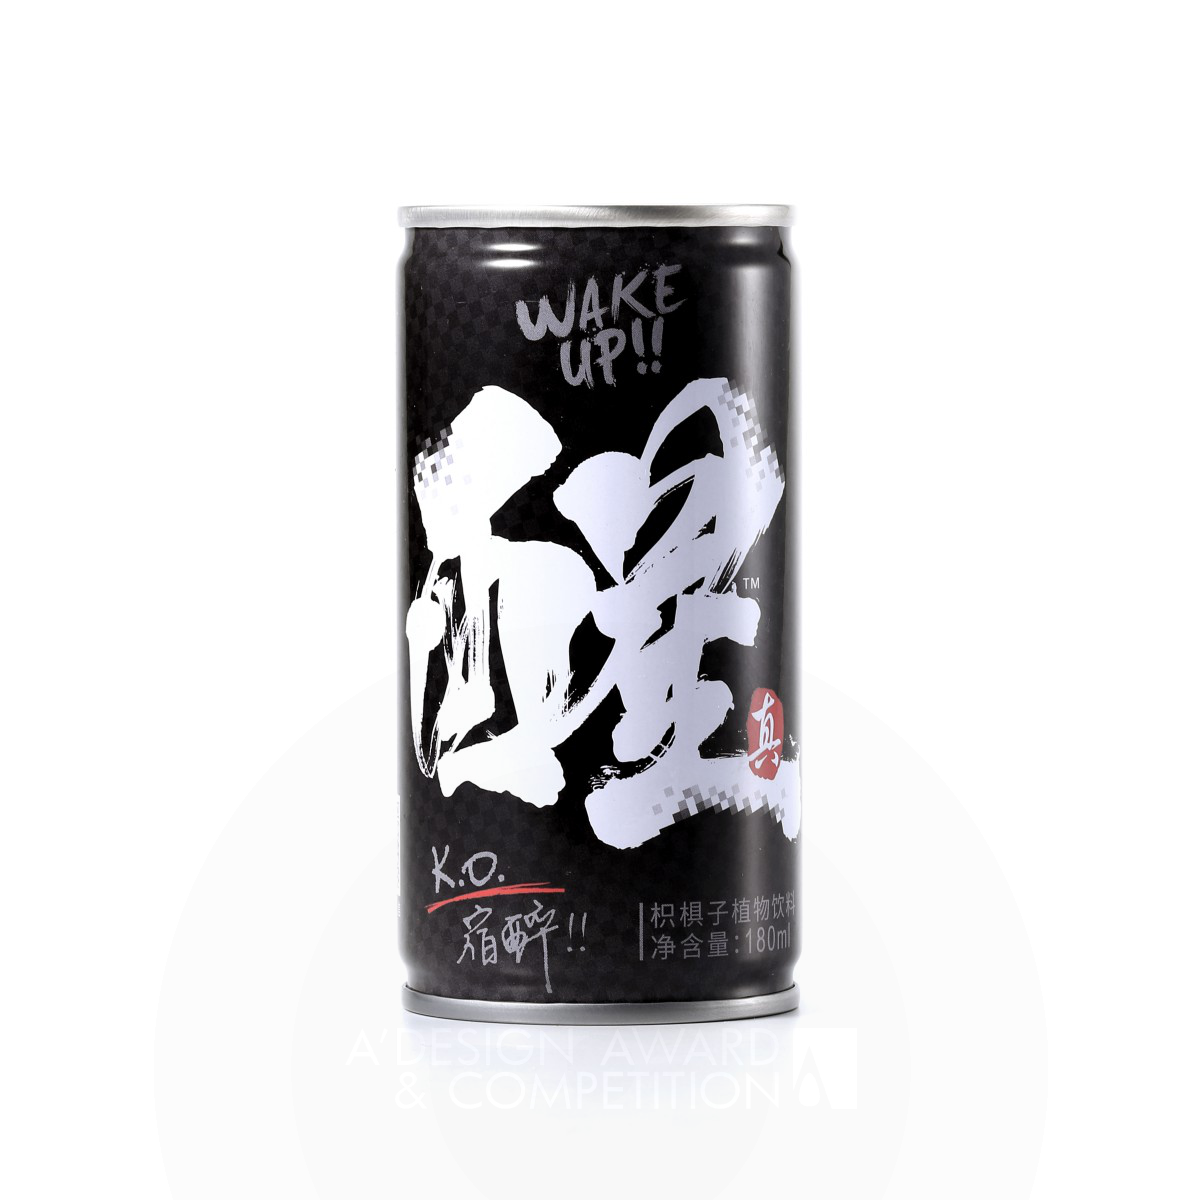 Wake Up hangover remedy drinks by Existence Design Co., Ltd